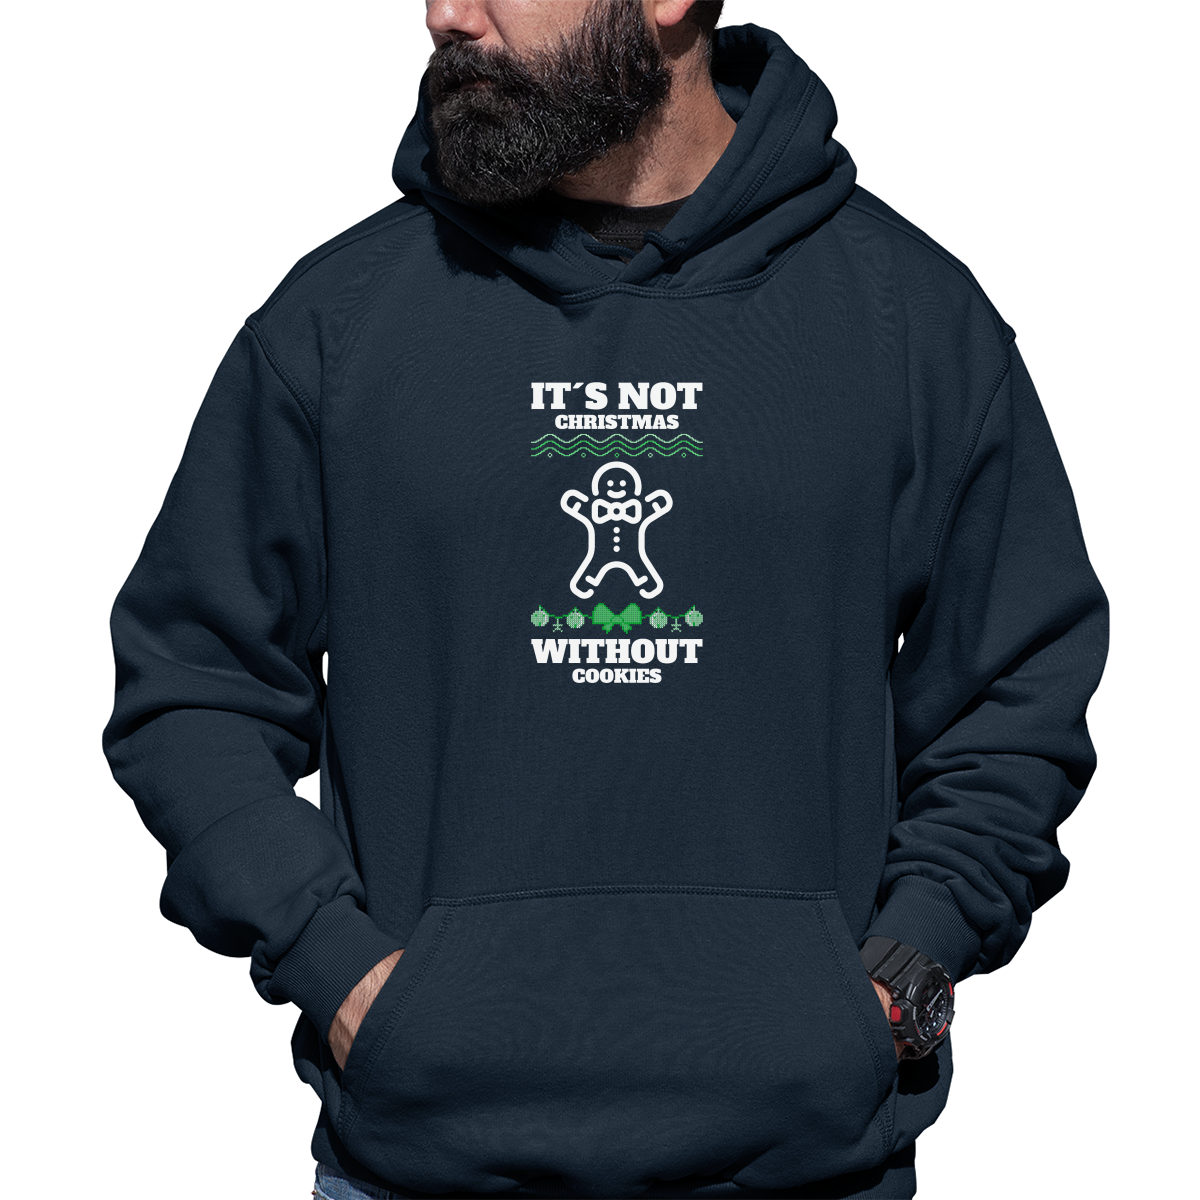 It's Not Christmas Without Cookies Unisex Hoodie | Navy